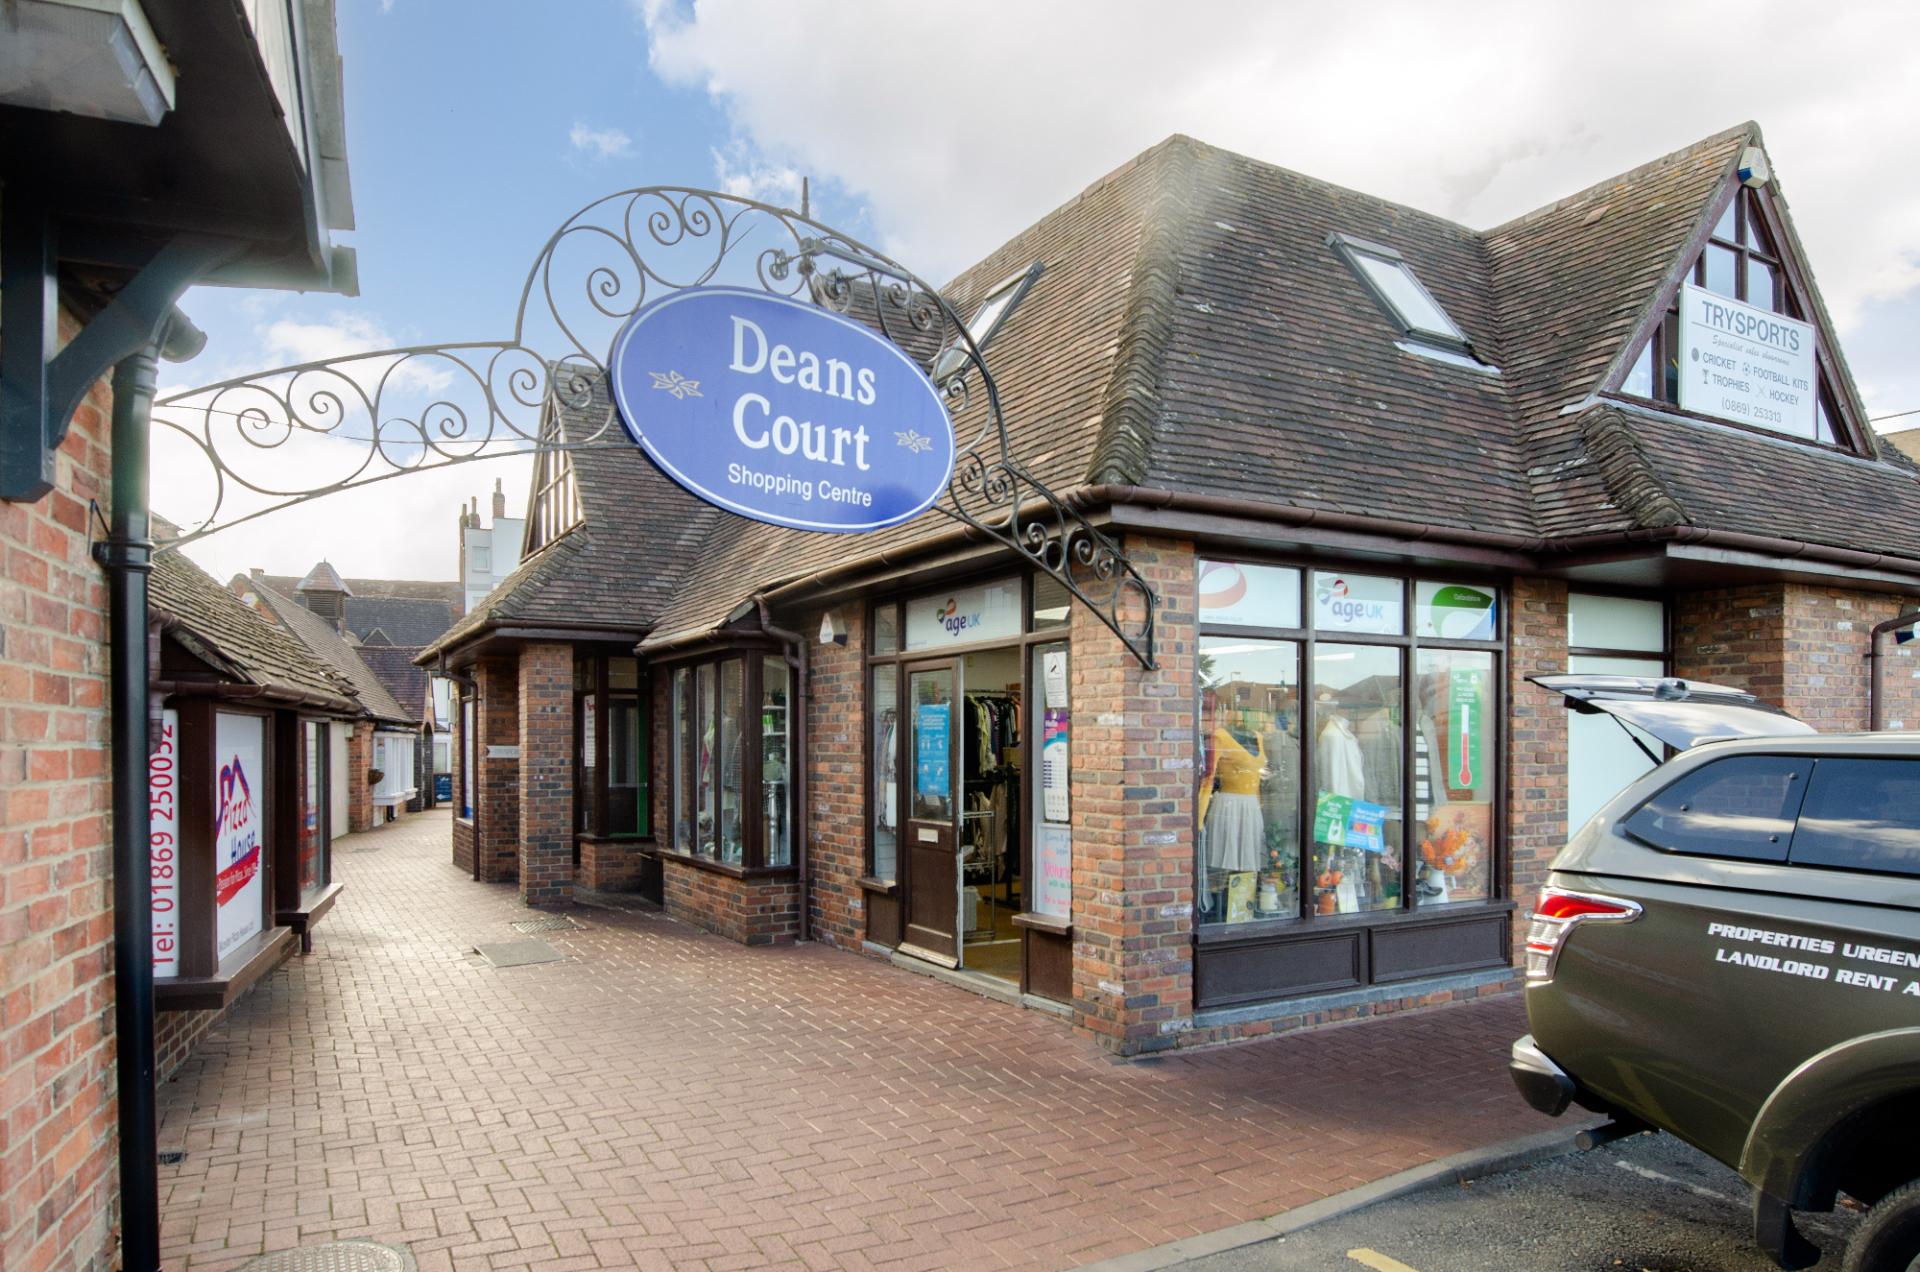 Shopping centre near Bicester Village on the market for £1.3m 